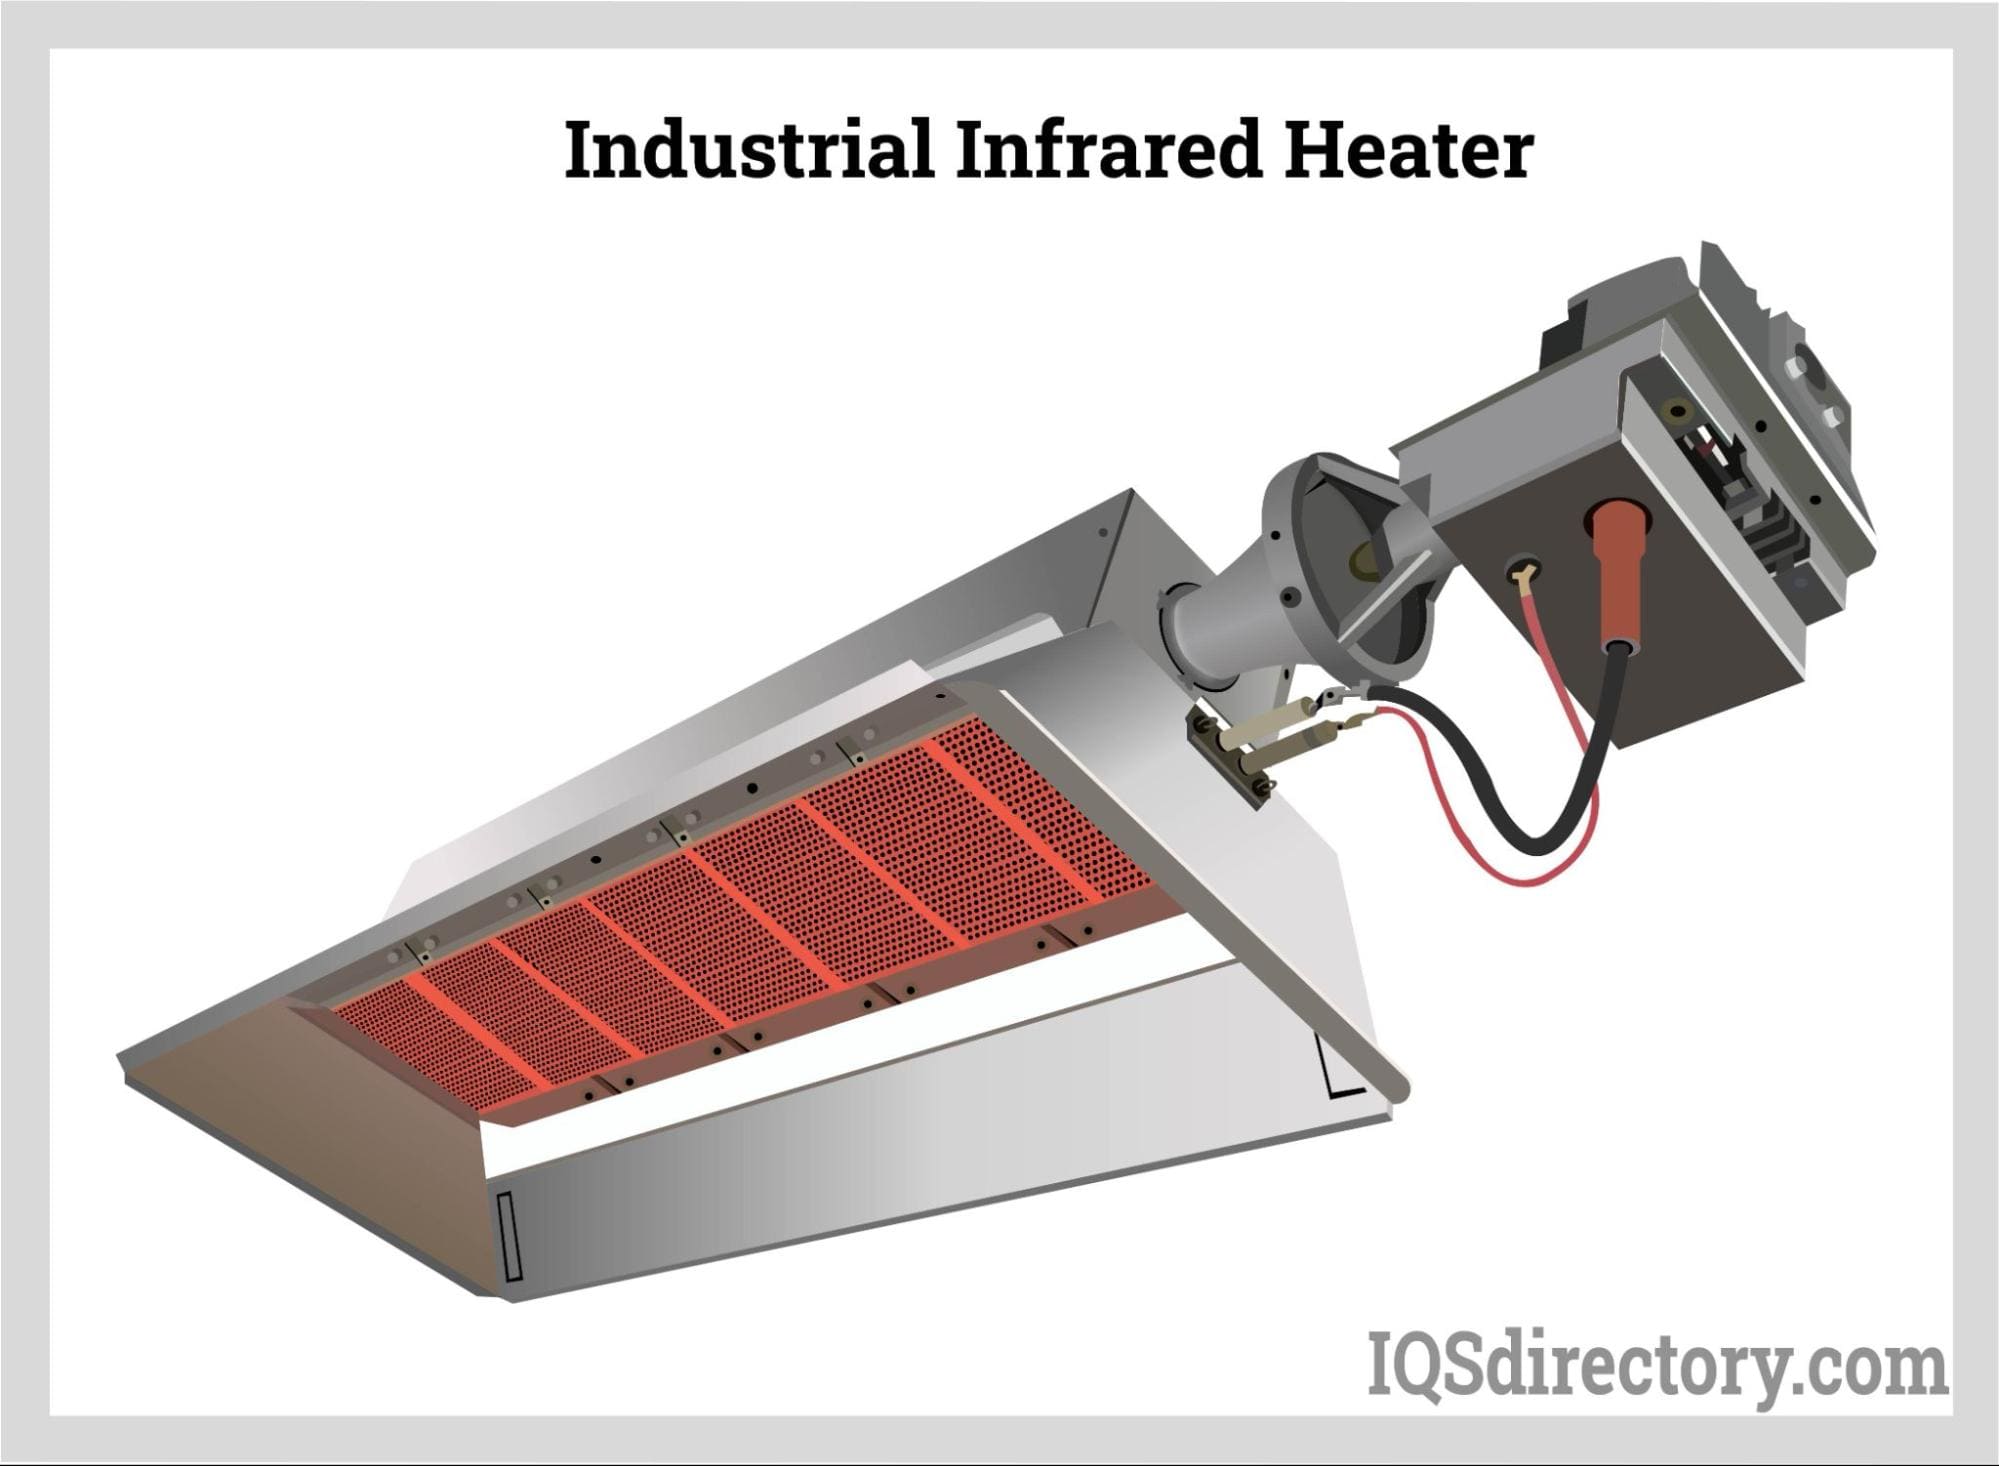 Industrial Infrared Heater